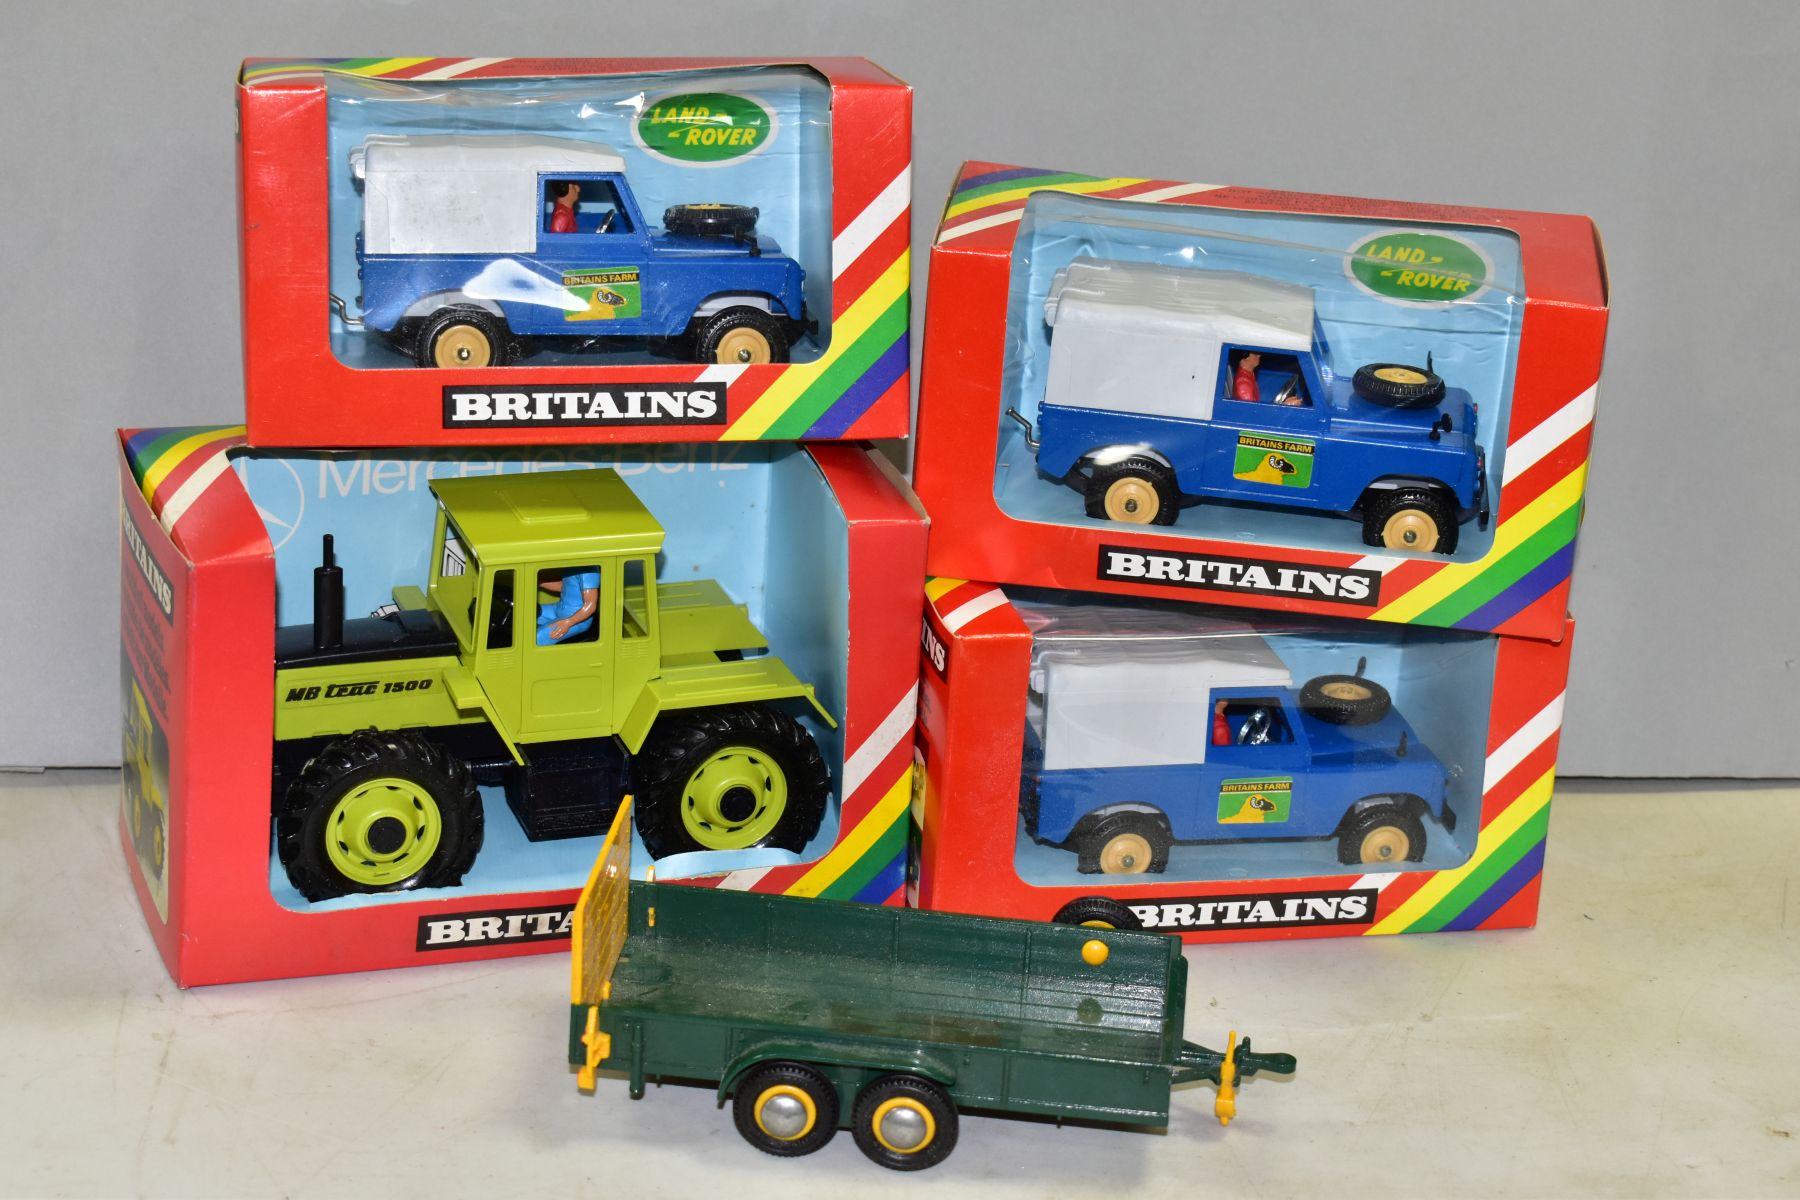 THREE BOXED BRITAINS FARM LAND ROVER MODELS, No.9571, appear complete and look to have hardly